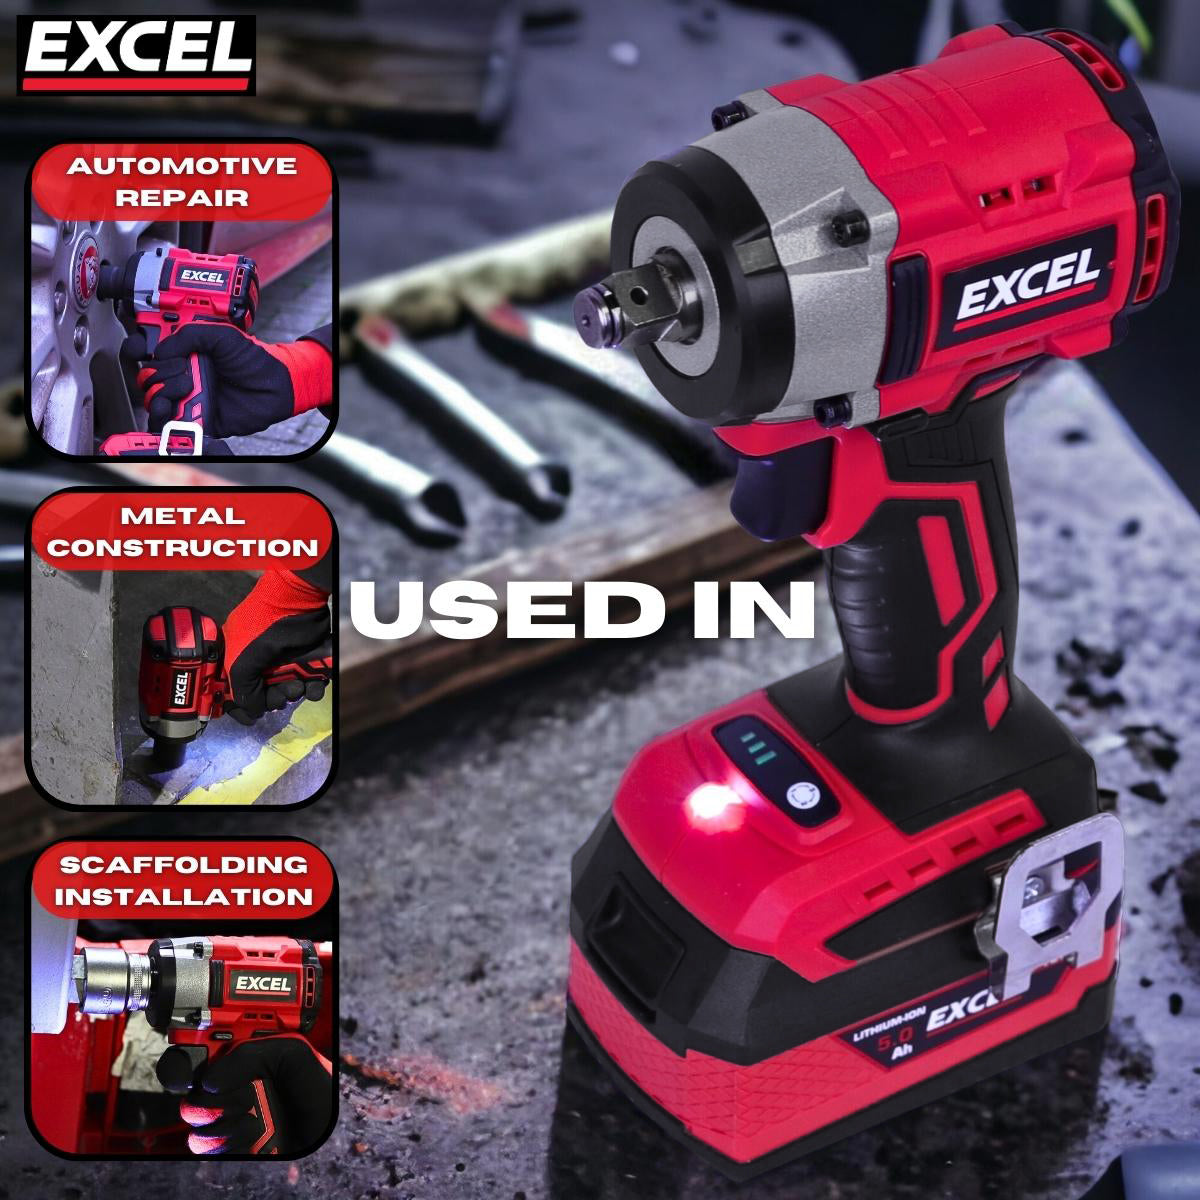 Excel 18V Brushless 1/2'' Impact Wrench Body Only (Battery & Charger Not Included)